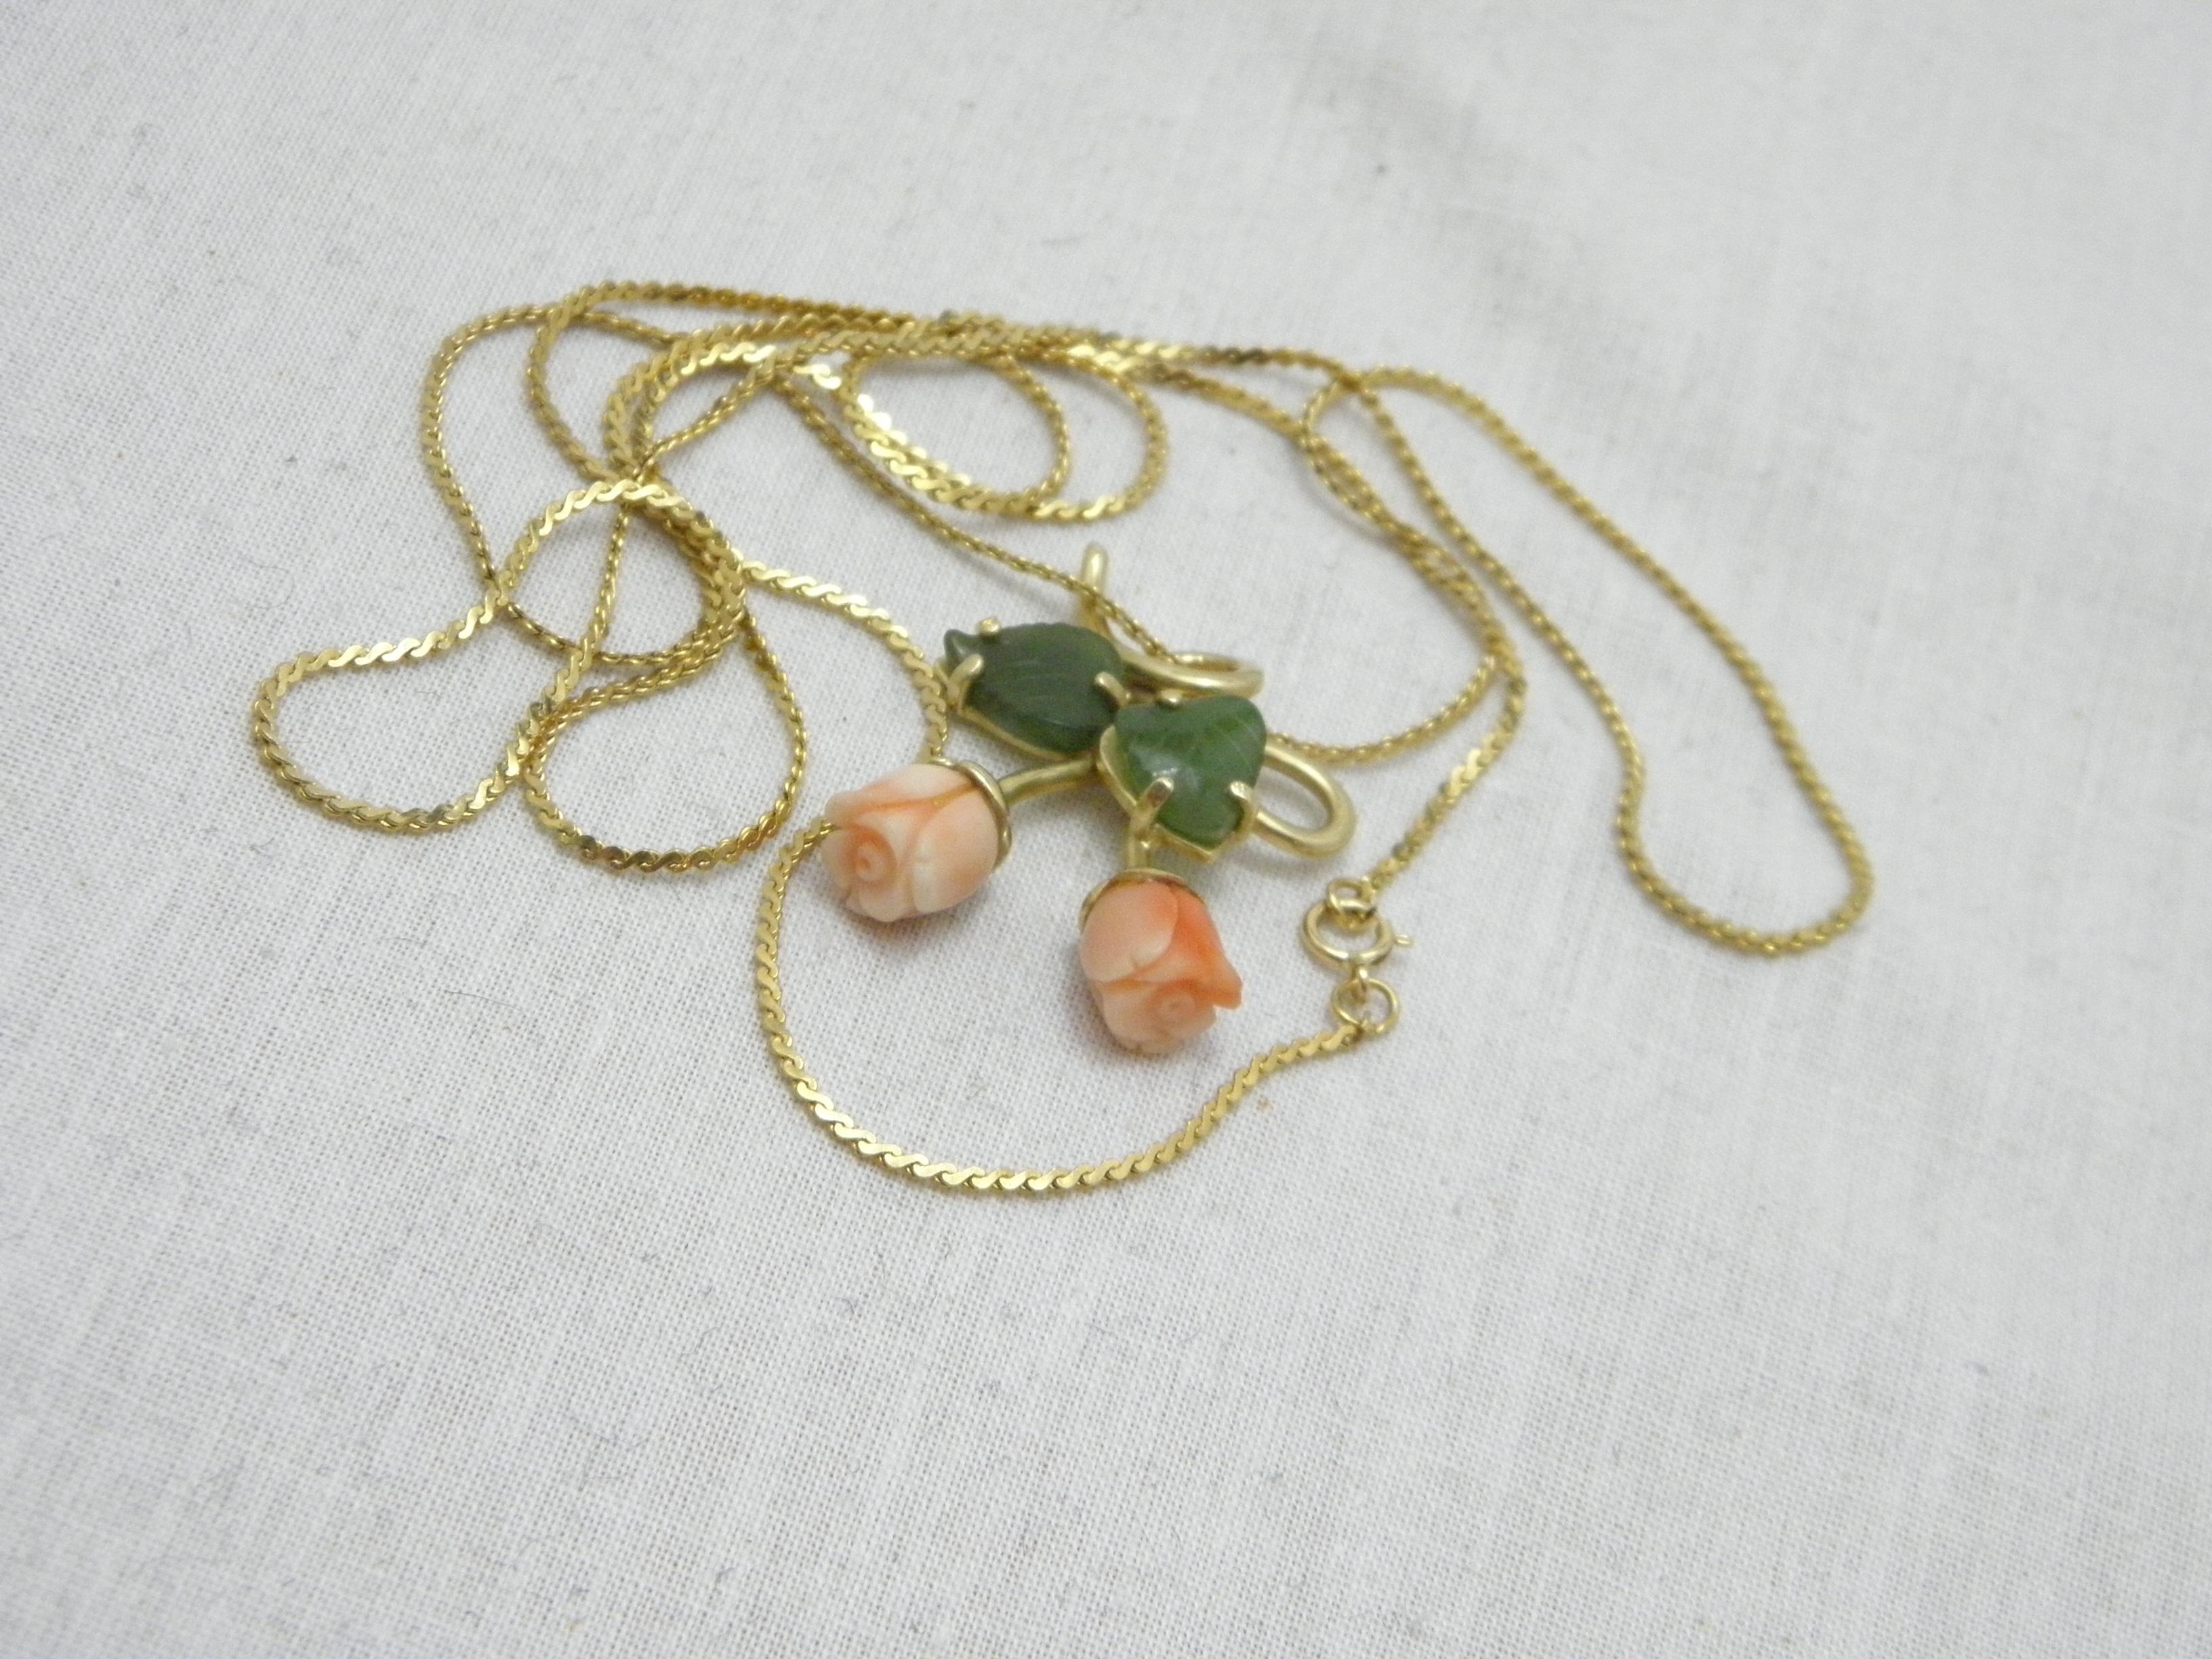 Antique 14ct Gold Jade Coral Roses Pendant Necklace Byzantine Chain 585 28 Inch For Sale 4